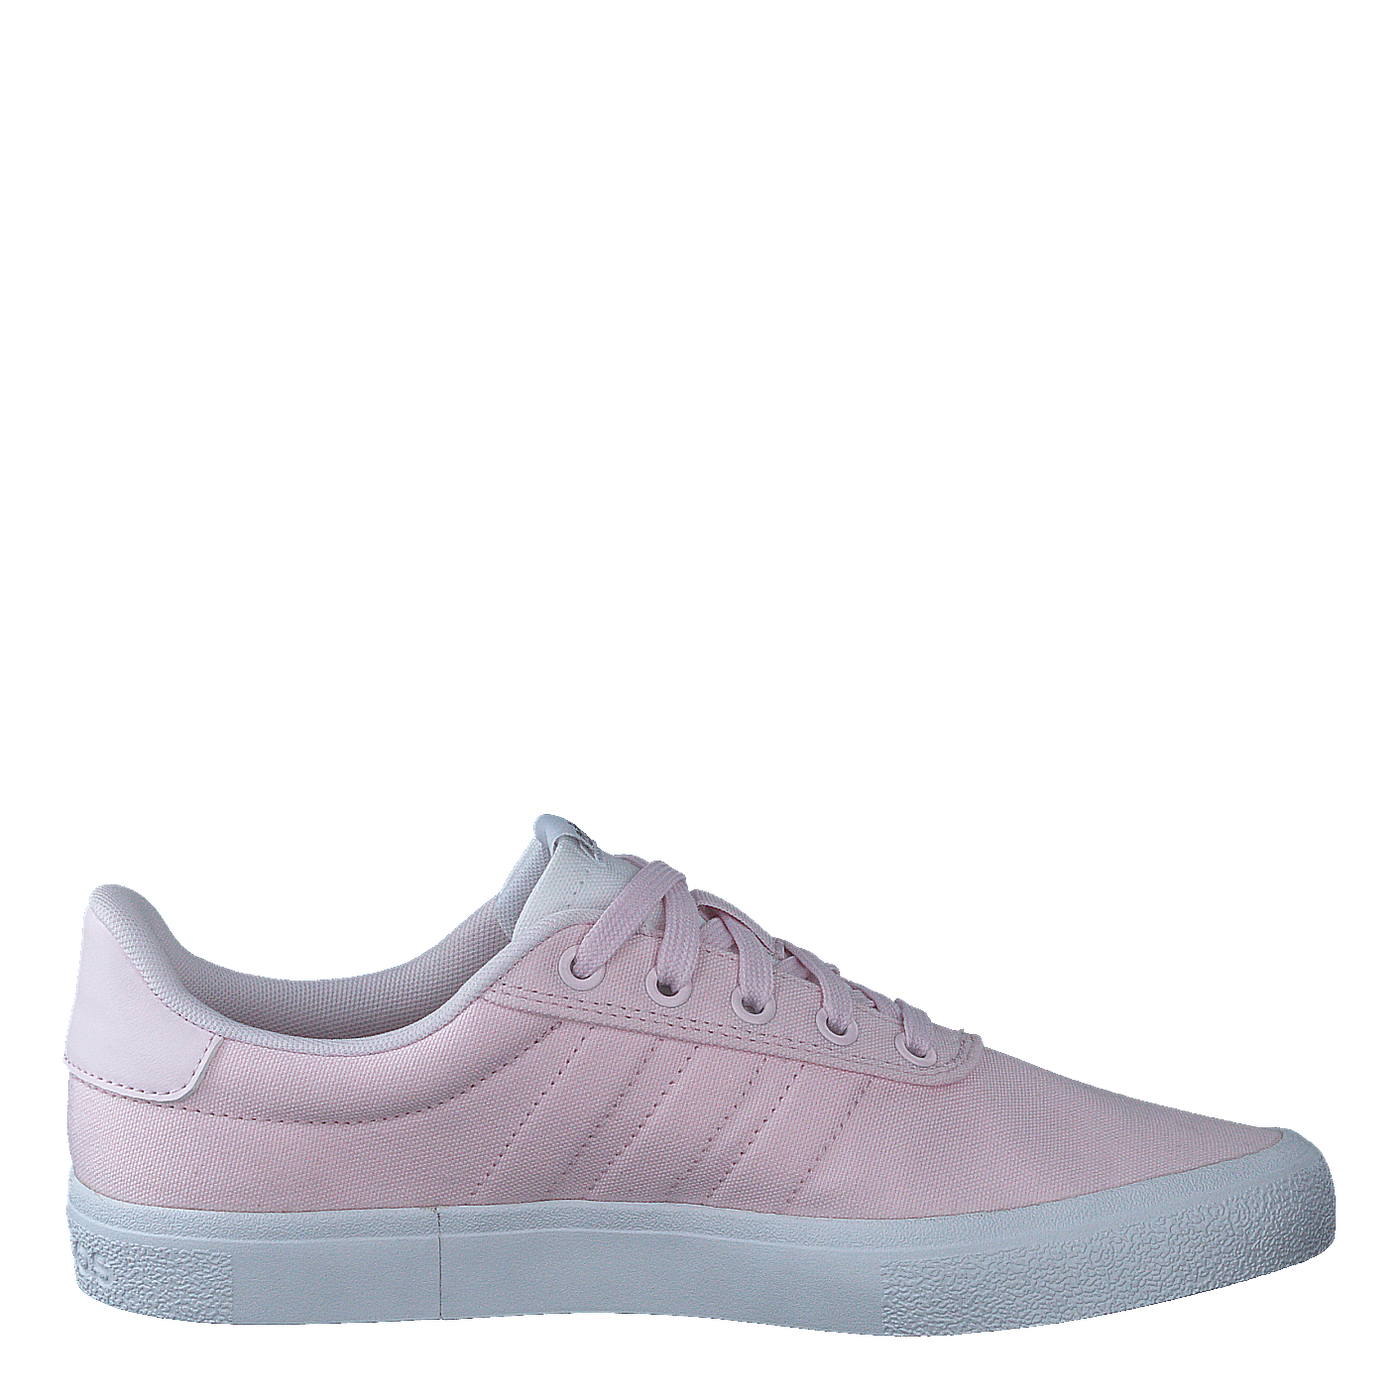 Vulc Raid3r Skateboarding Shoes Almost Pink / Almost Pink / Cloud White